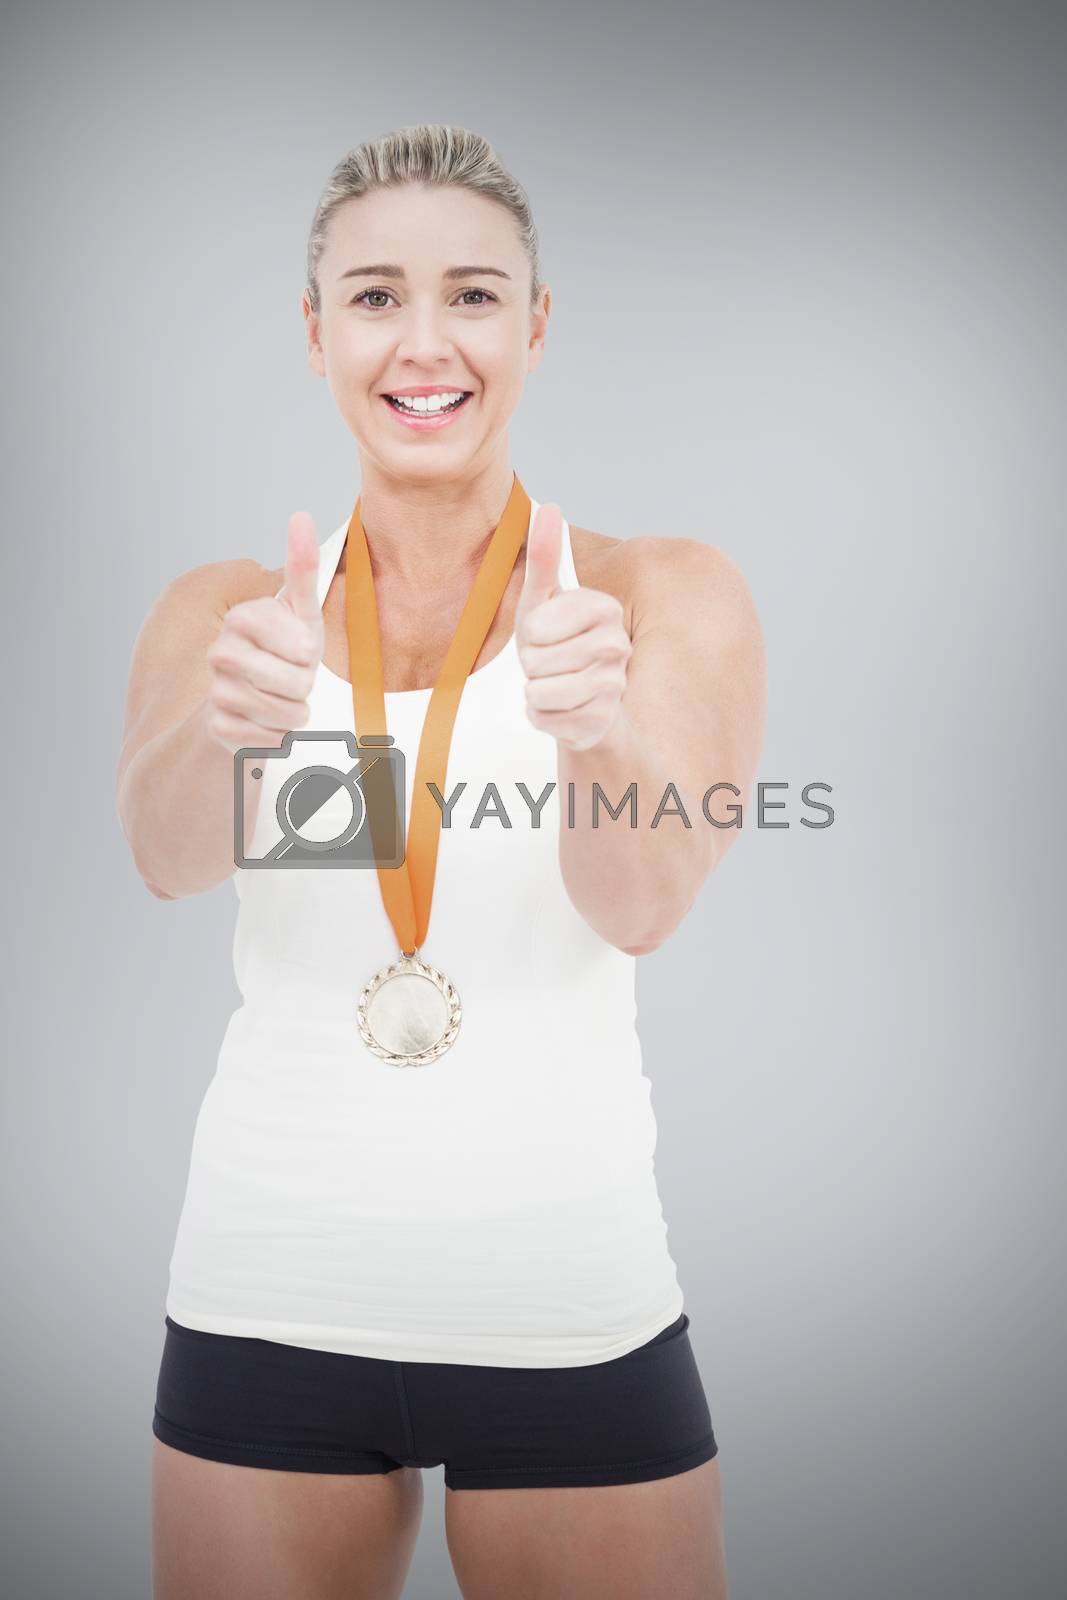 Royalty free image of Composite image of female athlete wearing a medal and showing thumbs up by Wavebreakmedia